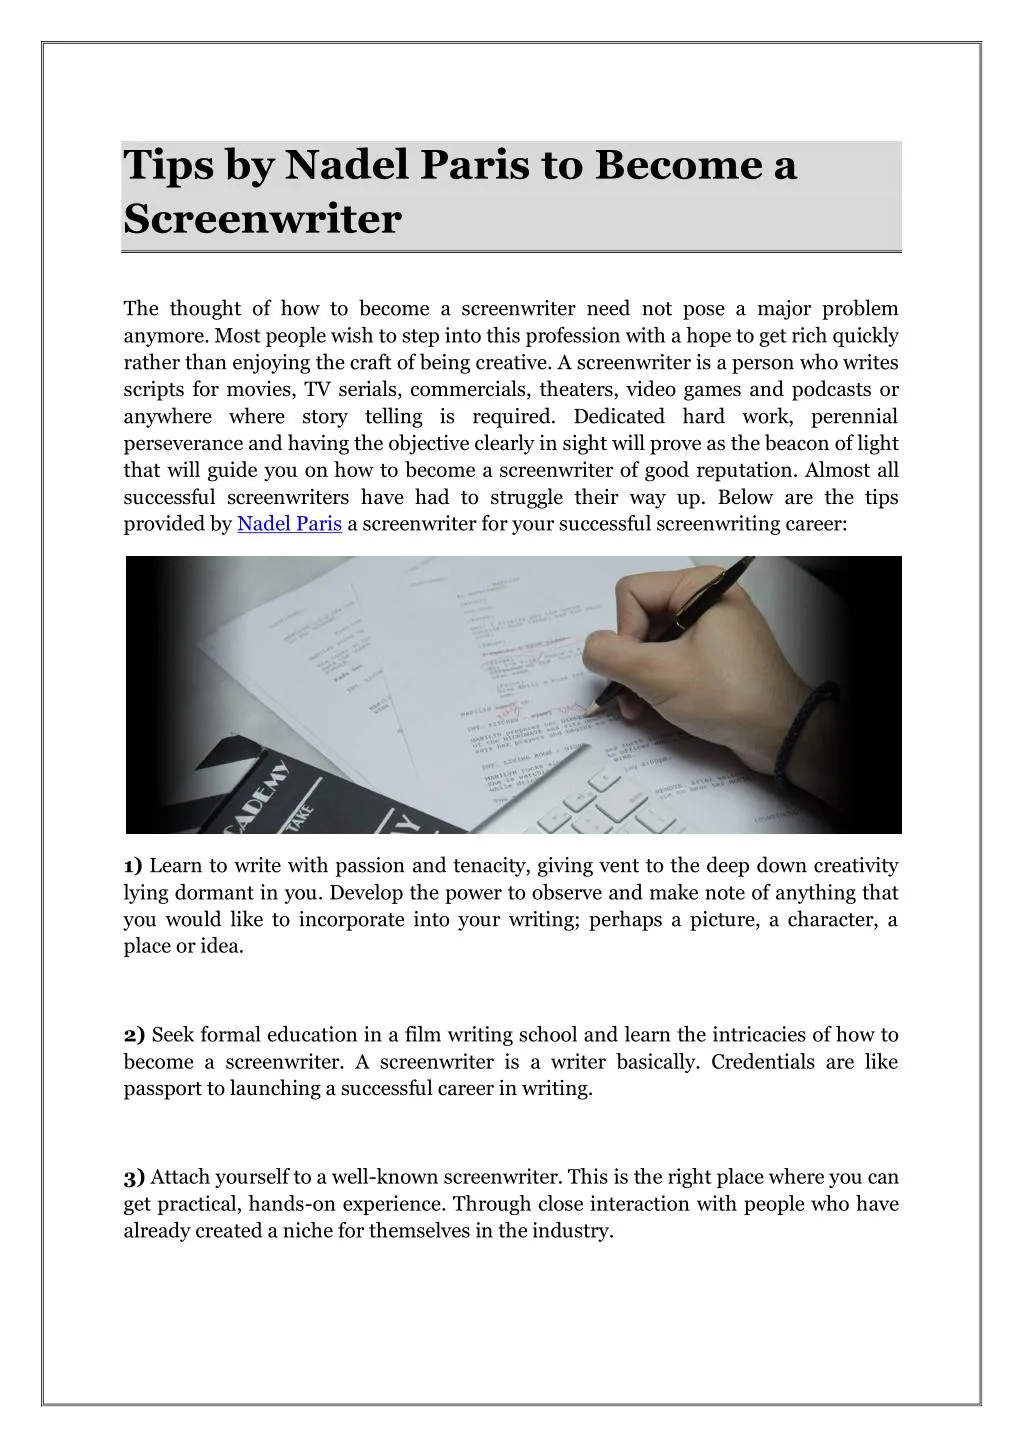 tips by nadel paris to become a screenwriter